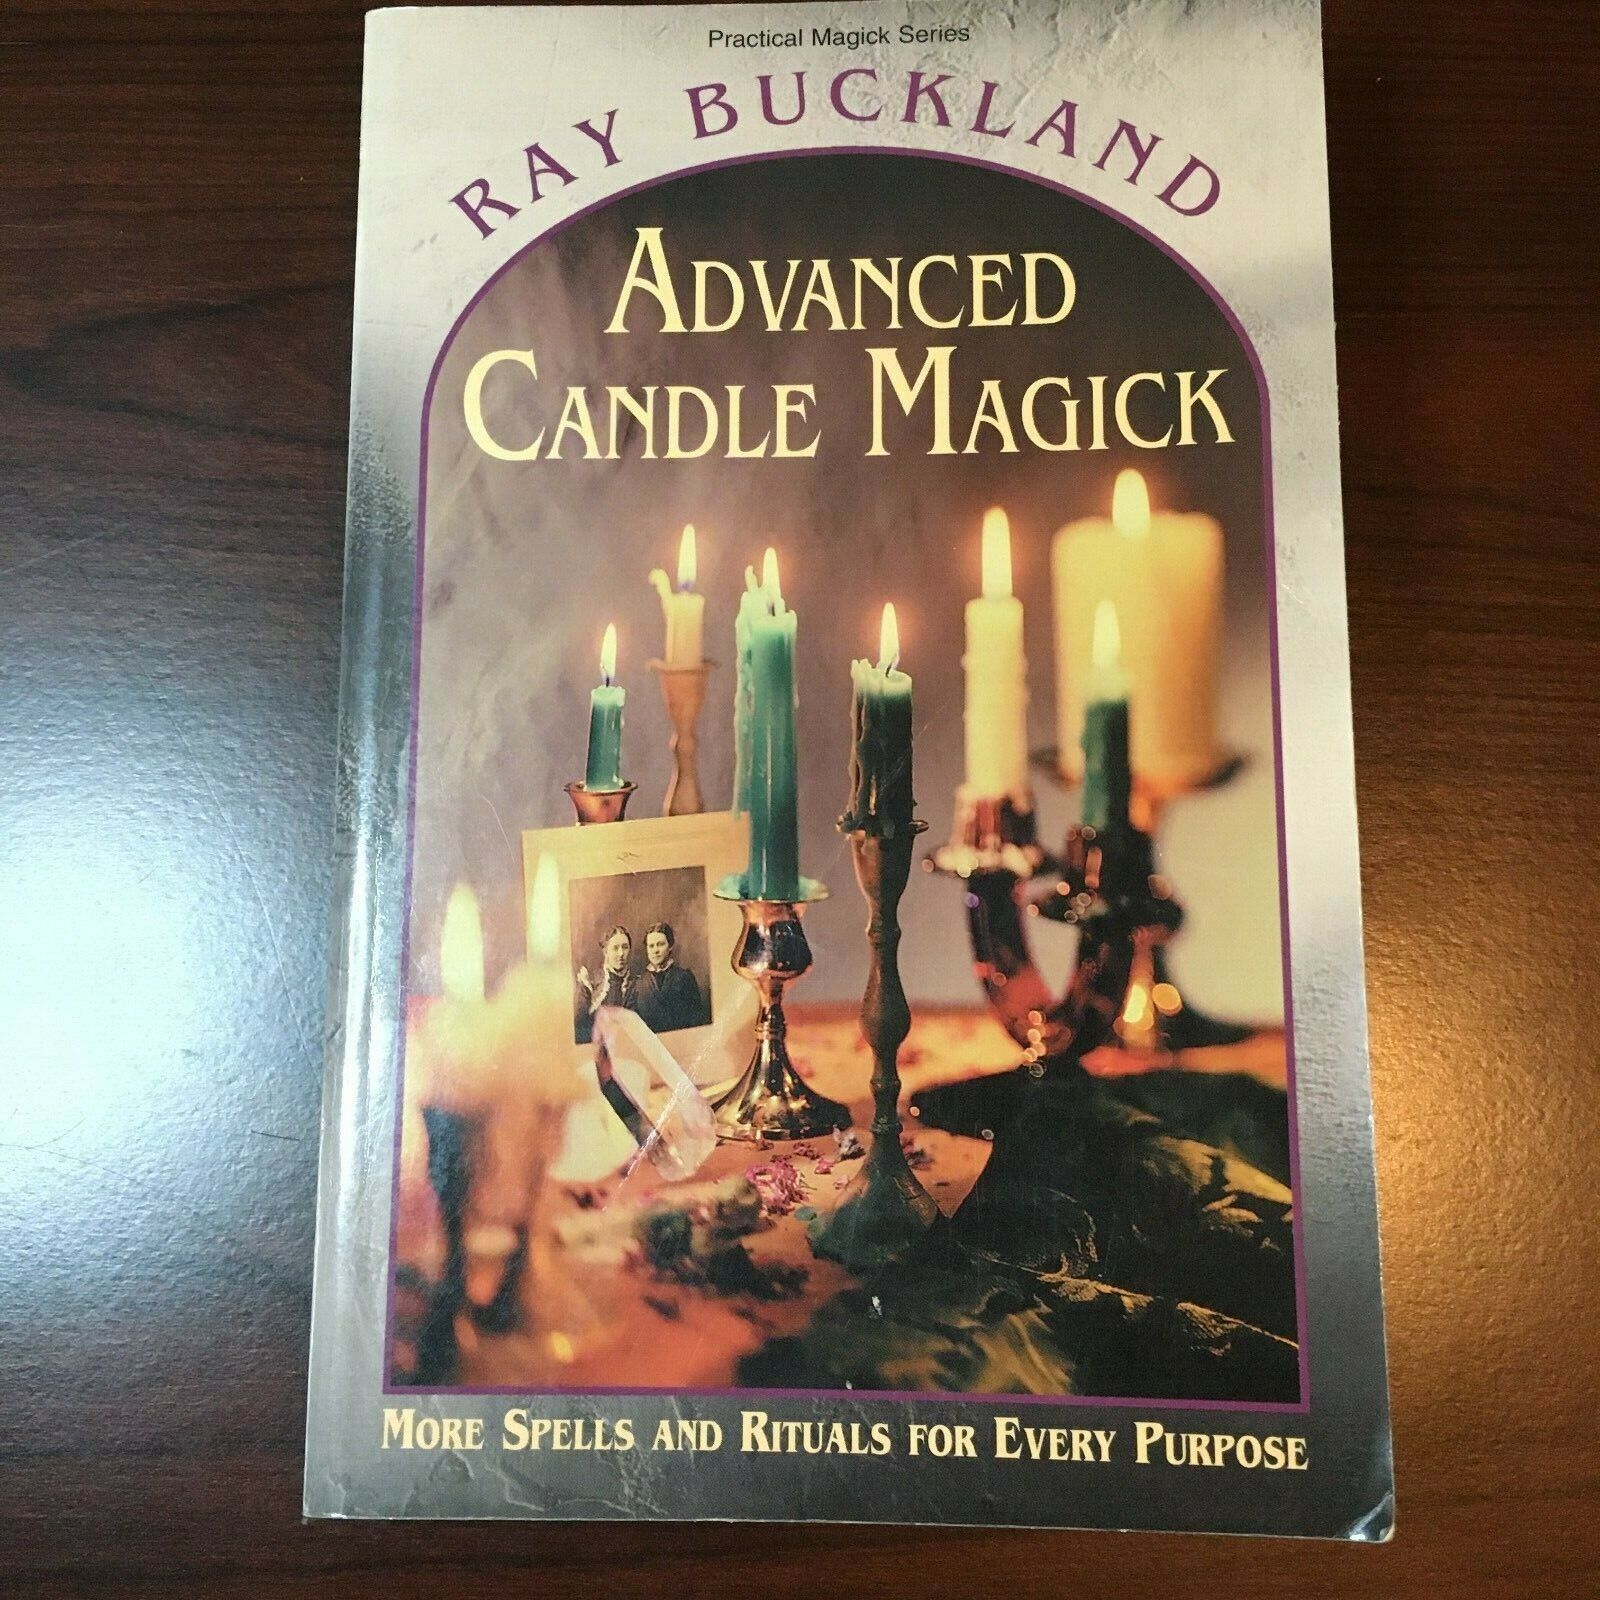 Advanced Candle Magick: More Spells and Rituals for Every Purpose - Ray Buckland